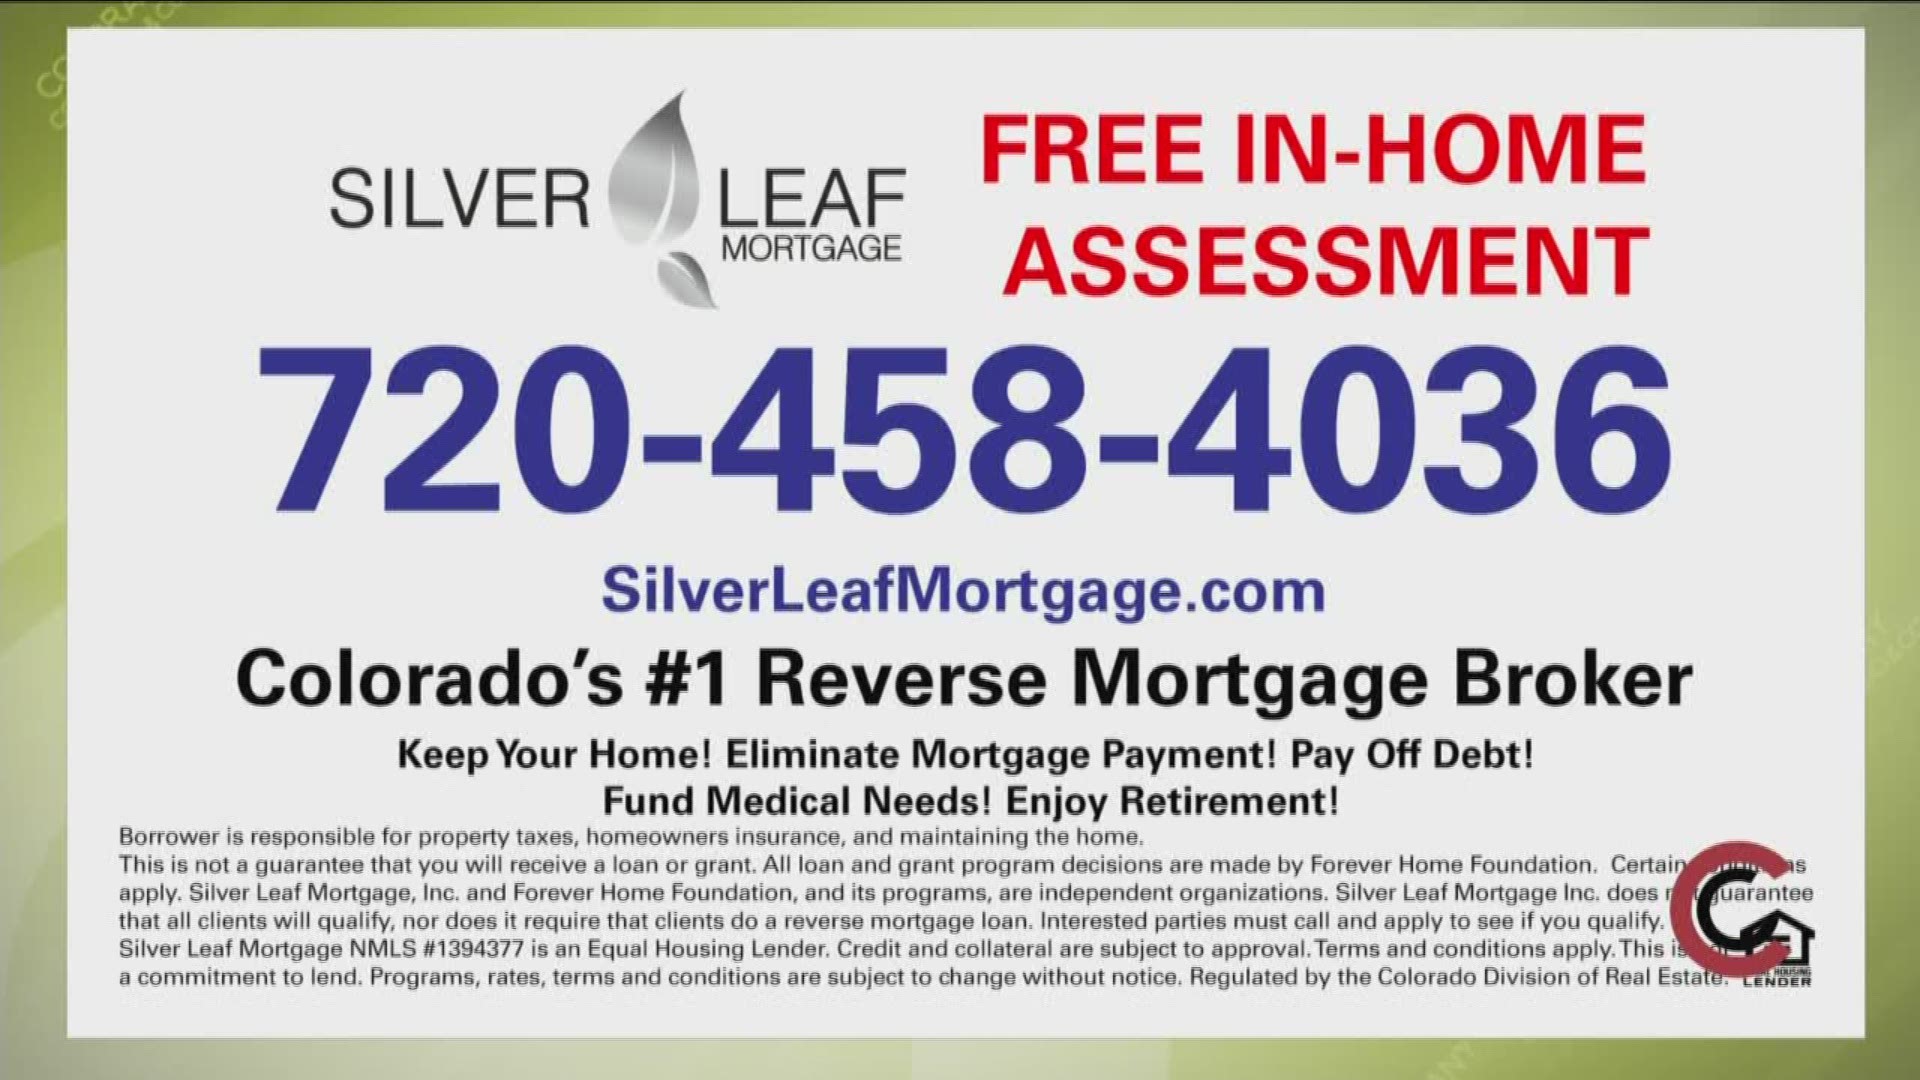 A reverse mortgage can increase your financial well-being in retirement. Call 720.458.4036 to find out if it can work for you! Learn more at SilverLeafMortgage.com.